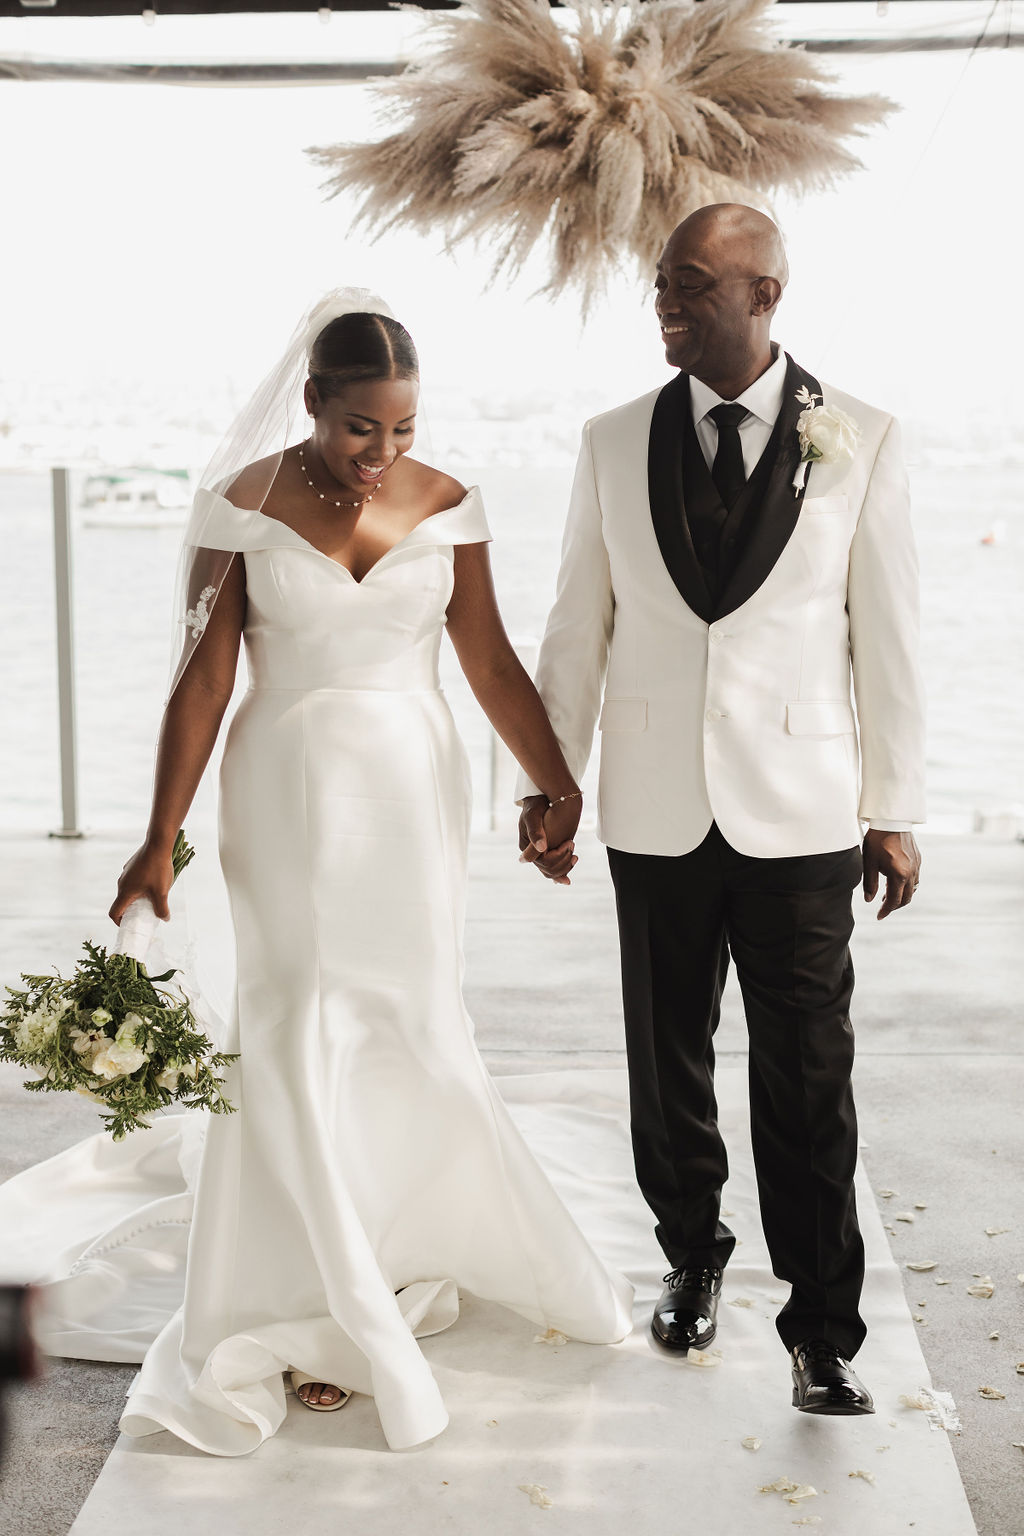 Bride In Simple Fit And Flare Wedding Dress Called Josie By Rebecca Ingram